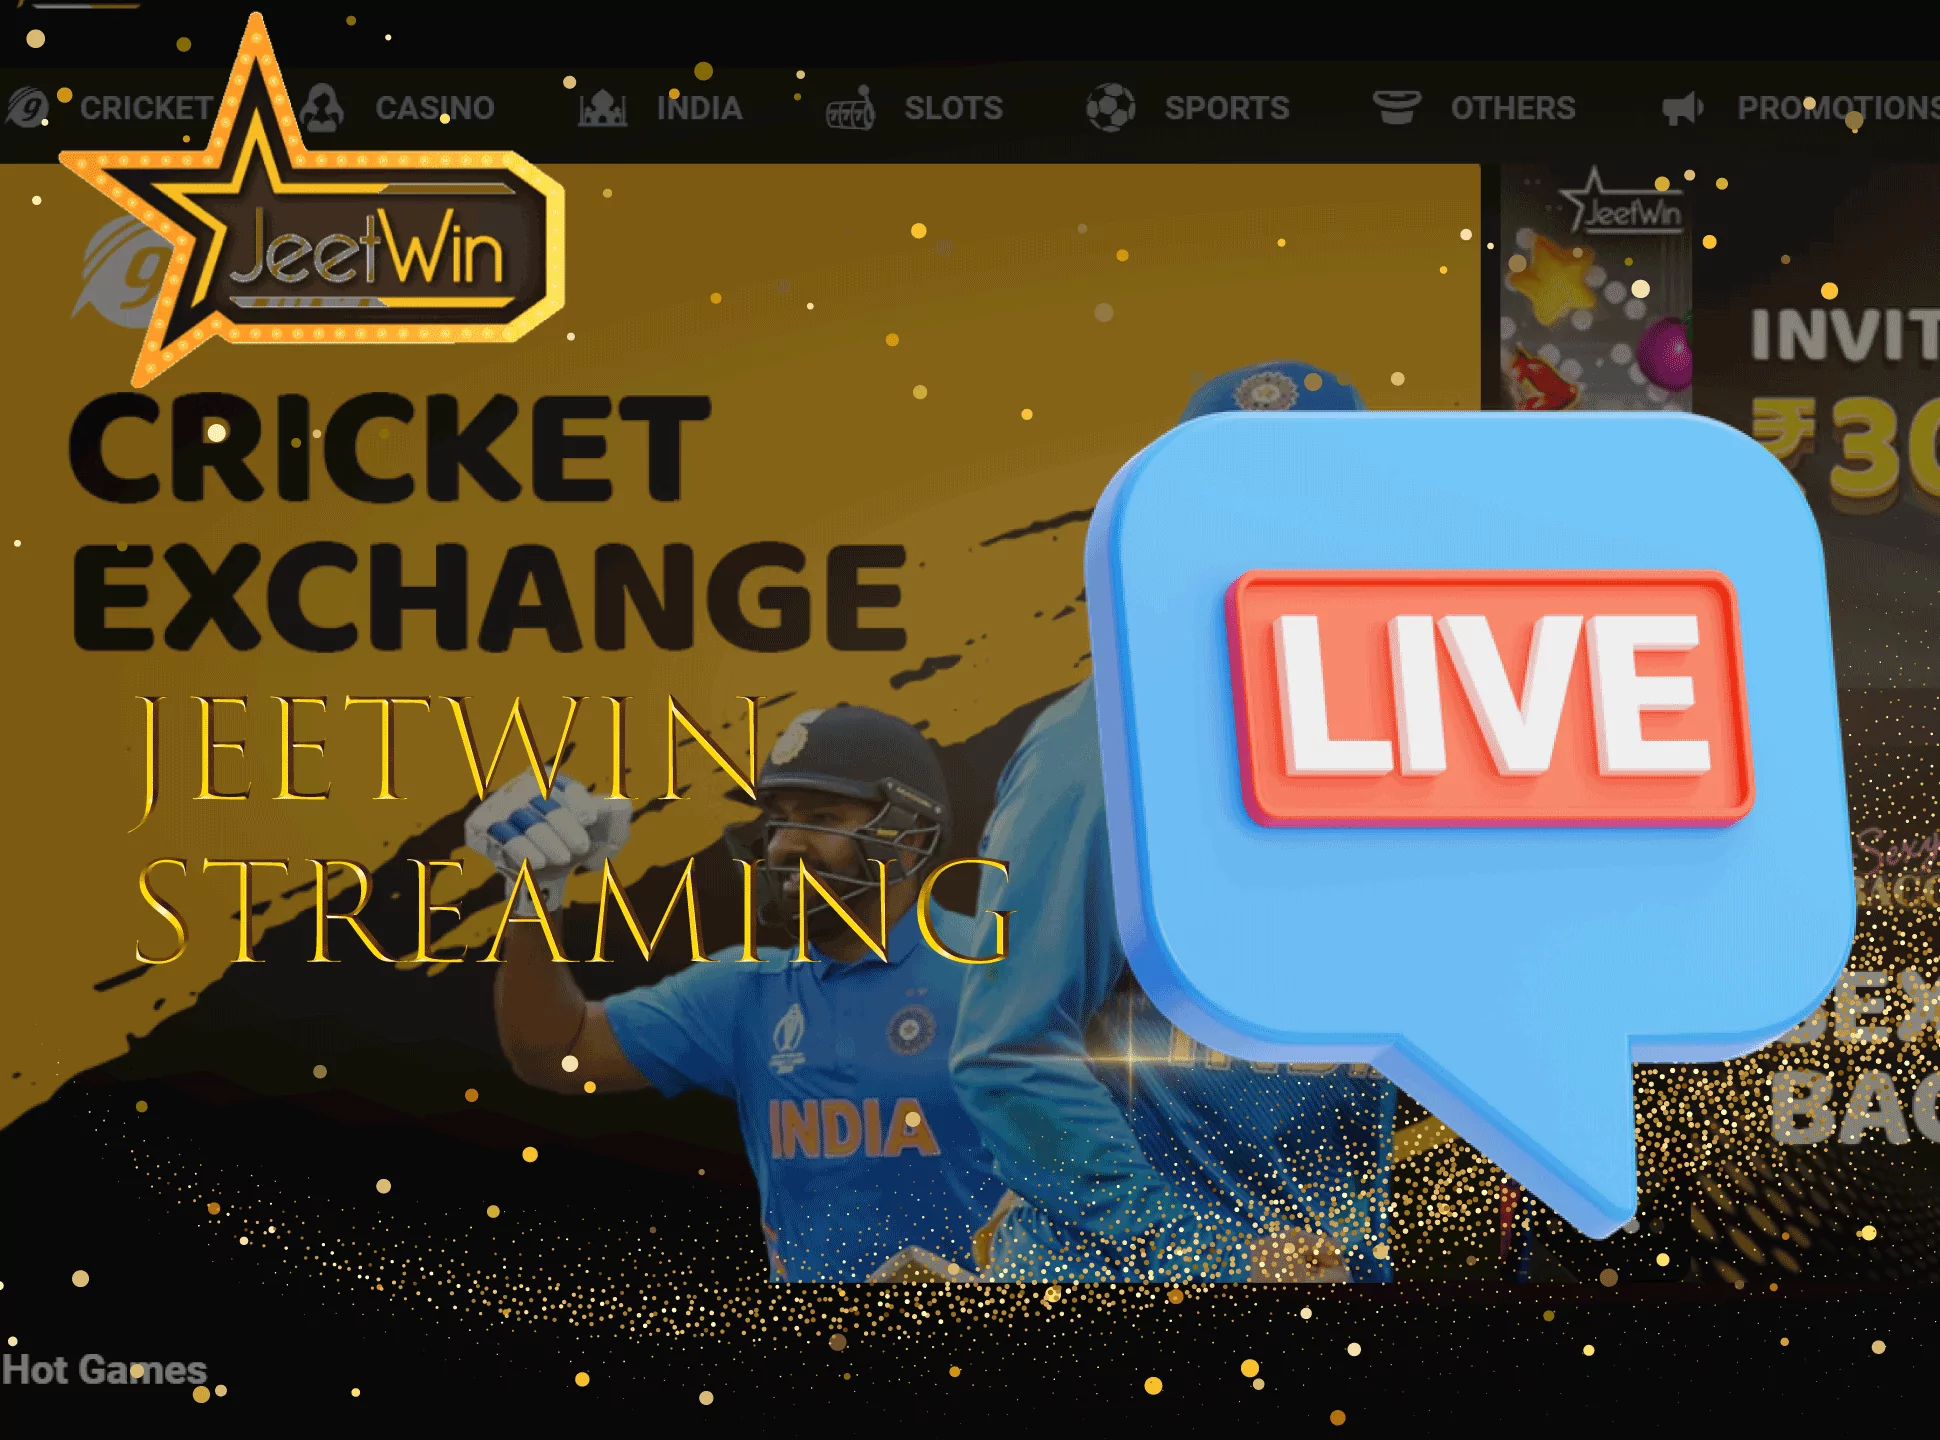 You can watch live streamings of the matches on the Jeetwin website.